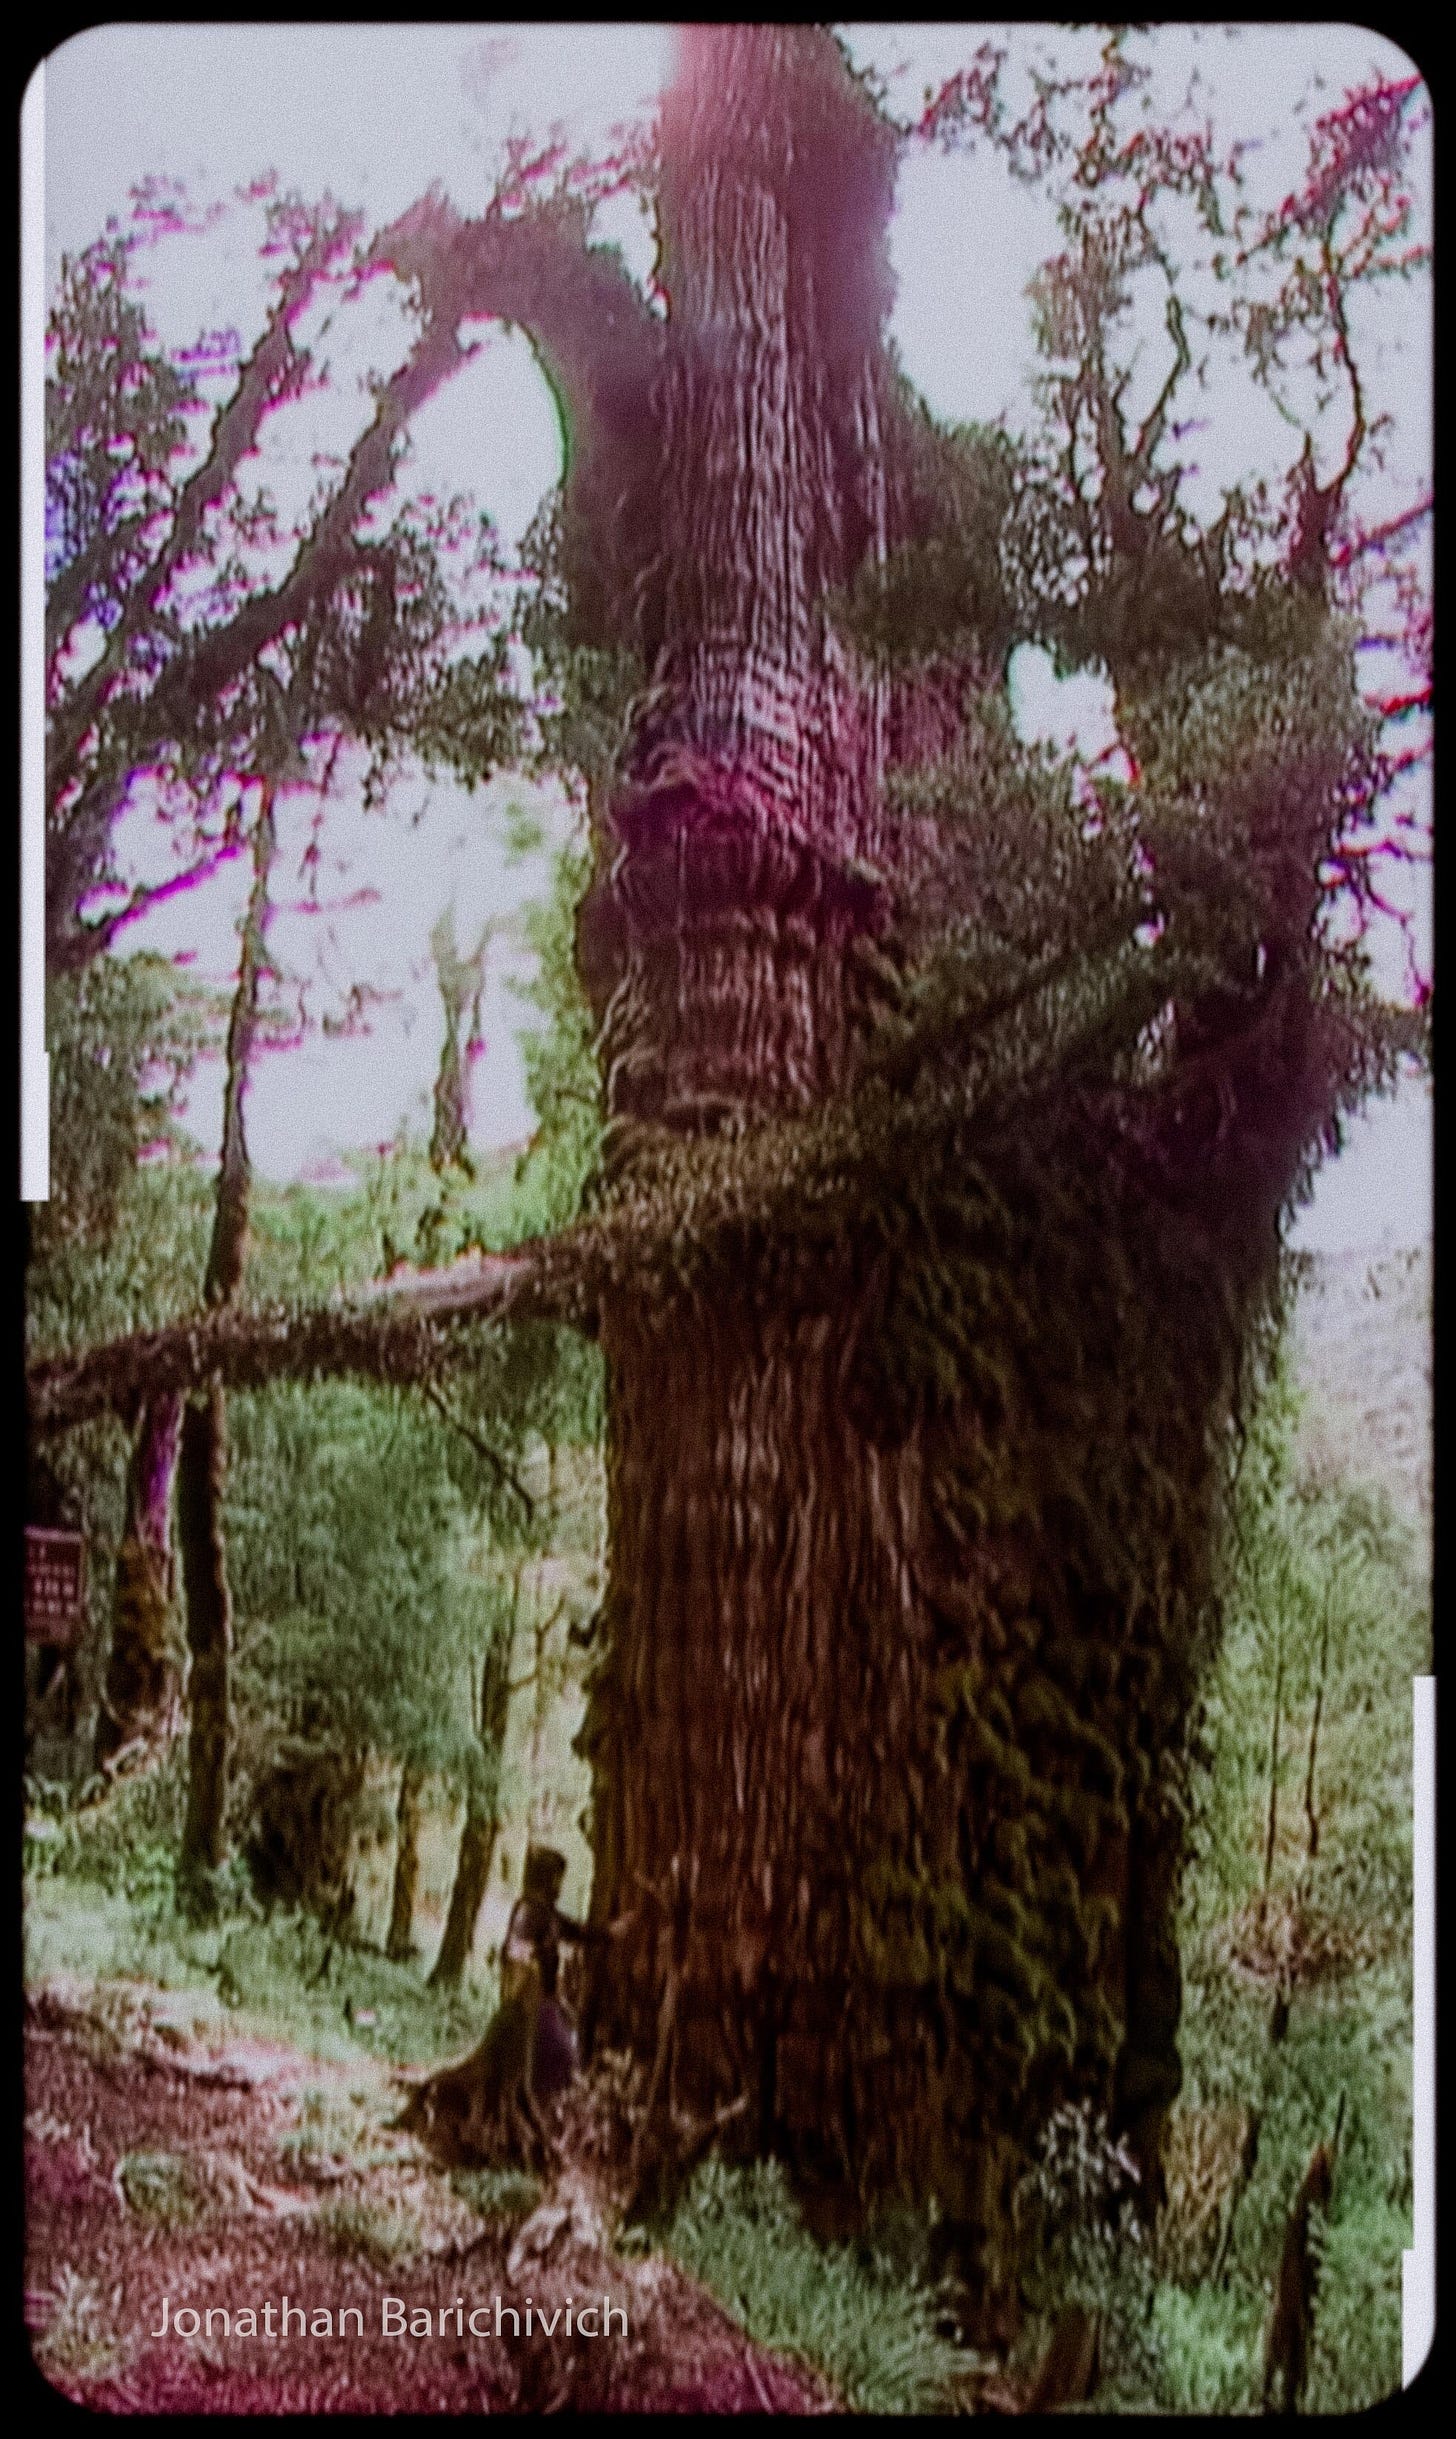 Alerce tree in Chile may be the oldest in the world